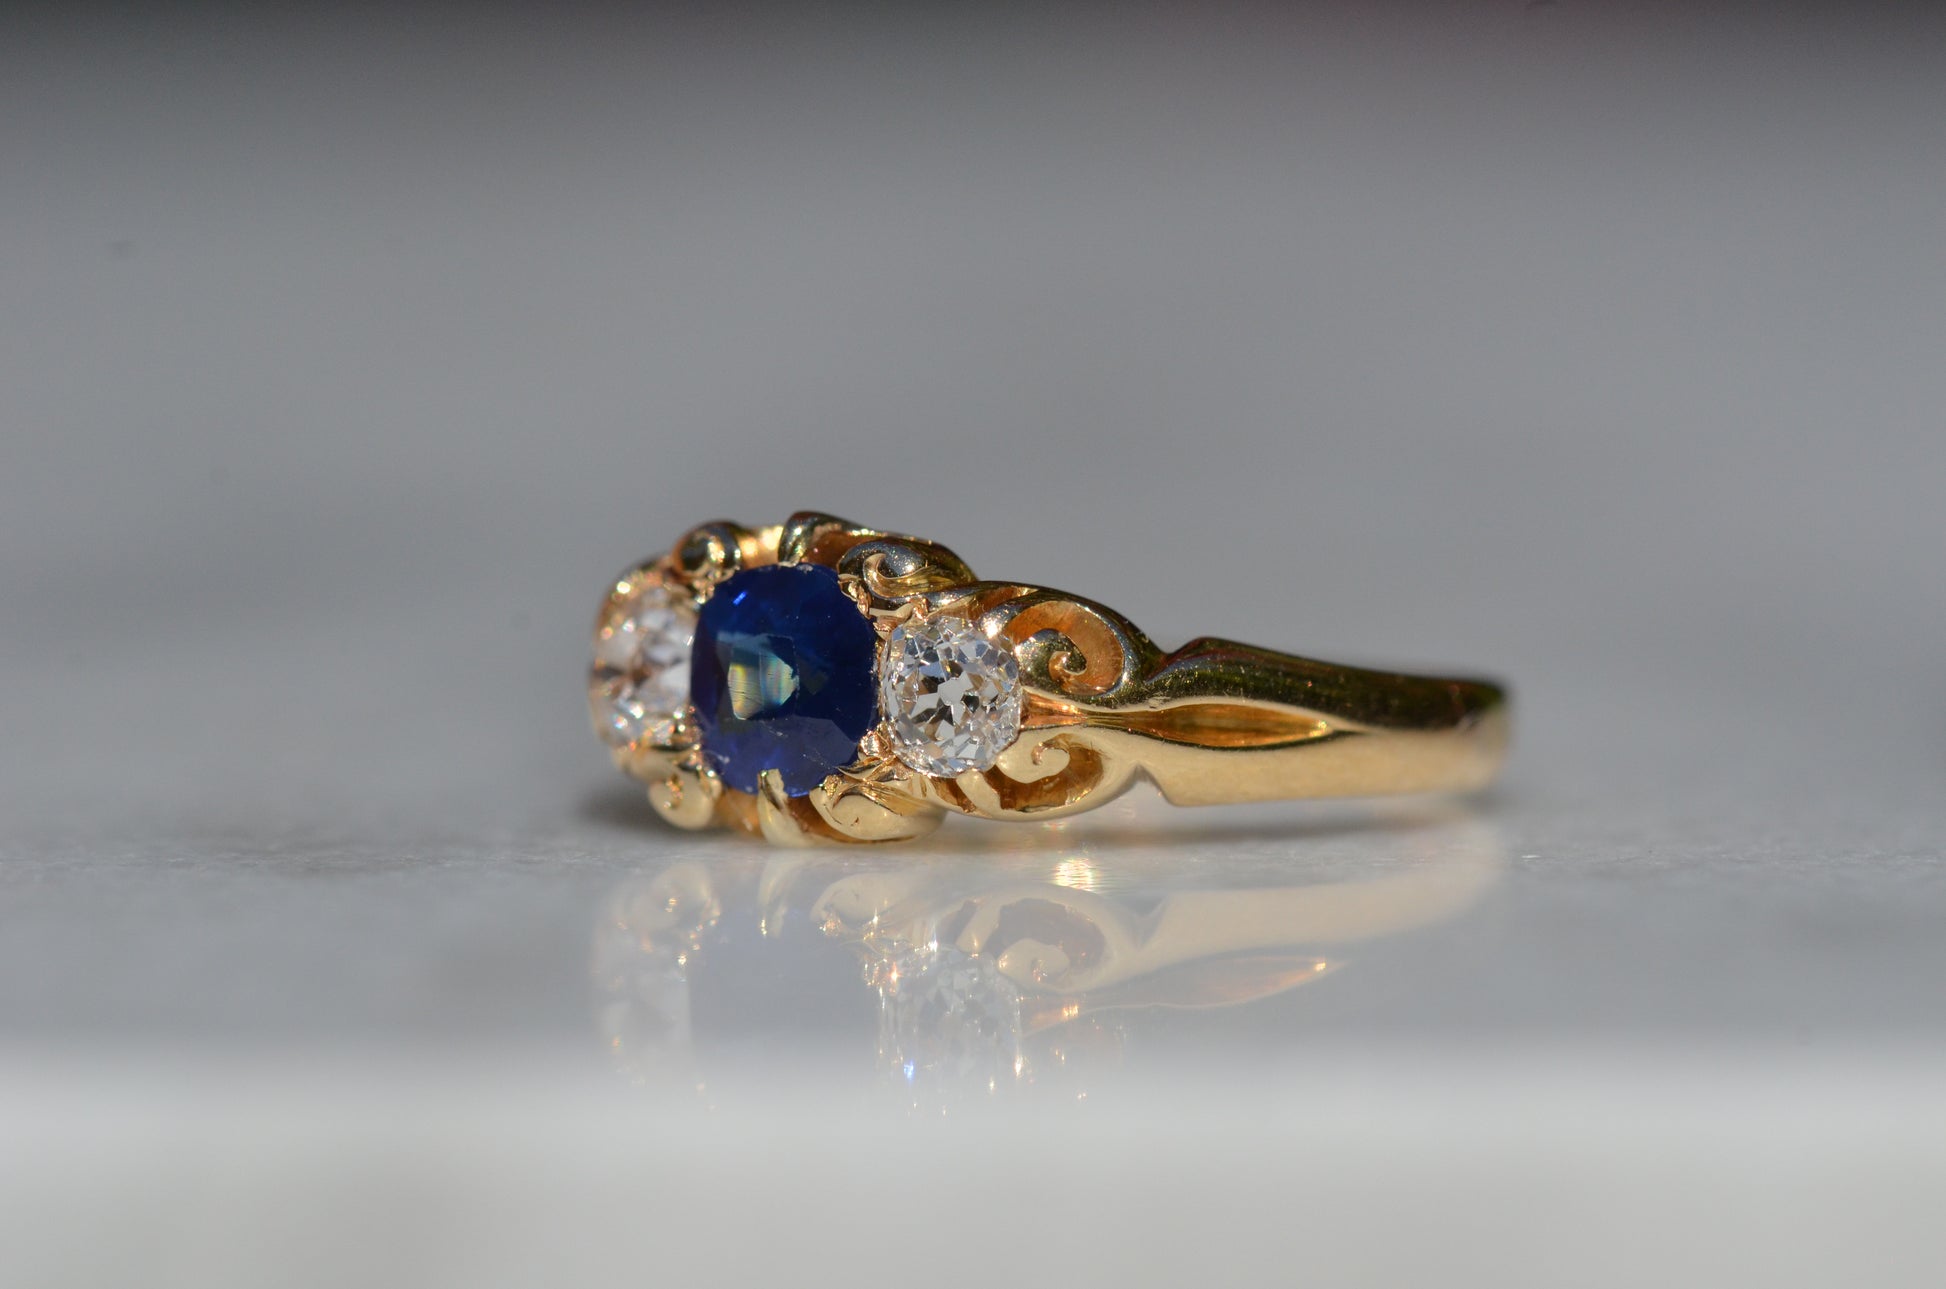 A Victorian ring in yellow gold with swirling shoulders and a central vivid blue sapphire flanked by a pair of old mine cut diamonds, photographed turned slightly to the left.